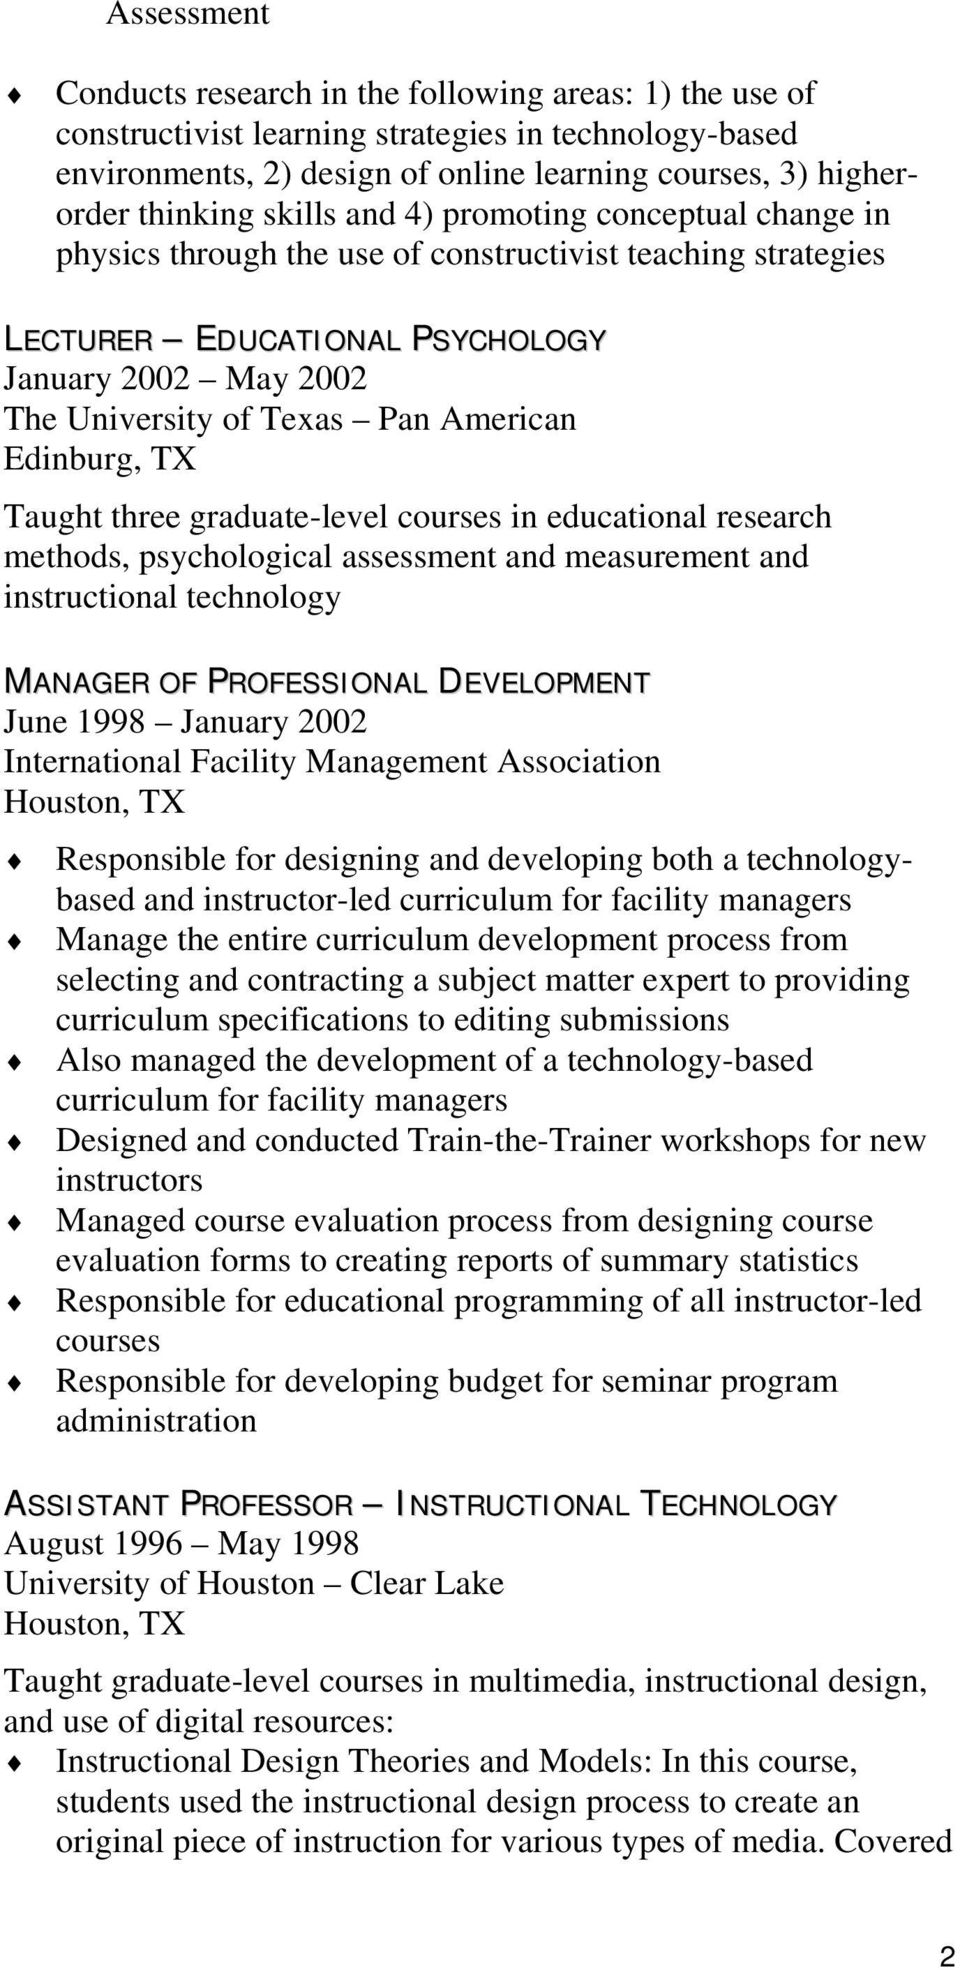 Edinburg, TX Taught three graduate-level courses in educational research methods, psychological assessment and measurement and instructional technology MANAGER OF PROFESSIONAL DEVELOPMENT June 1998